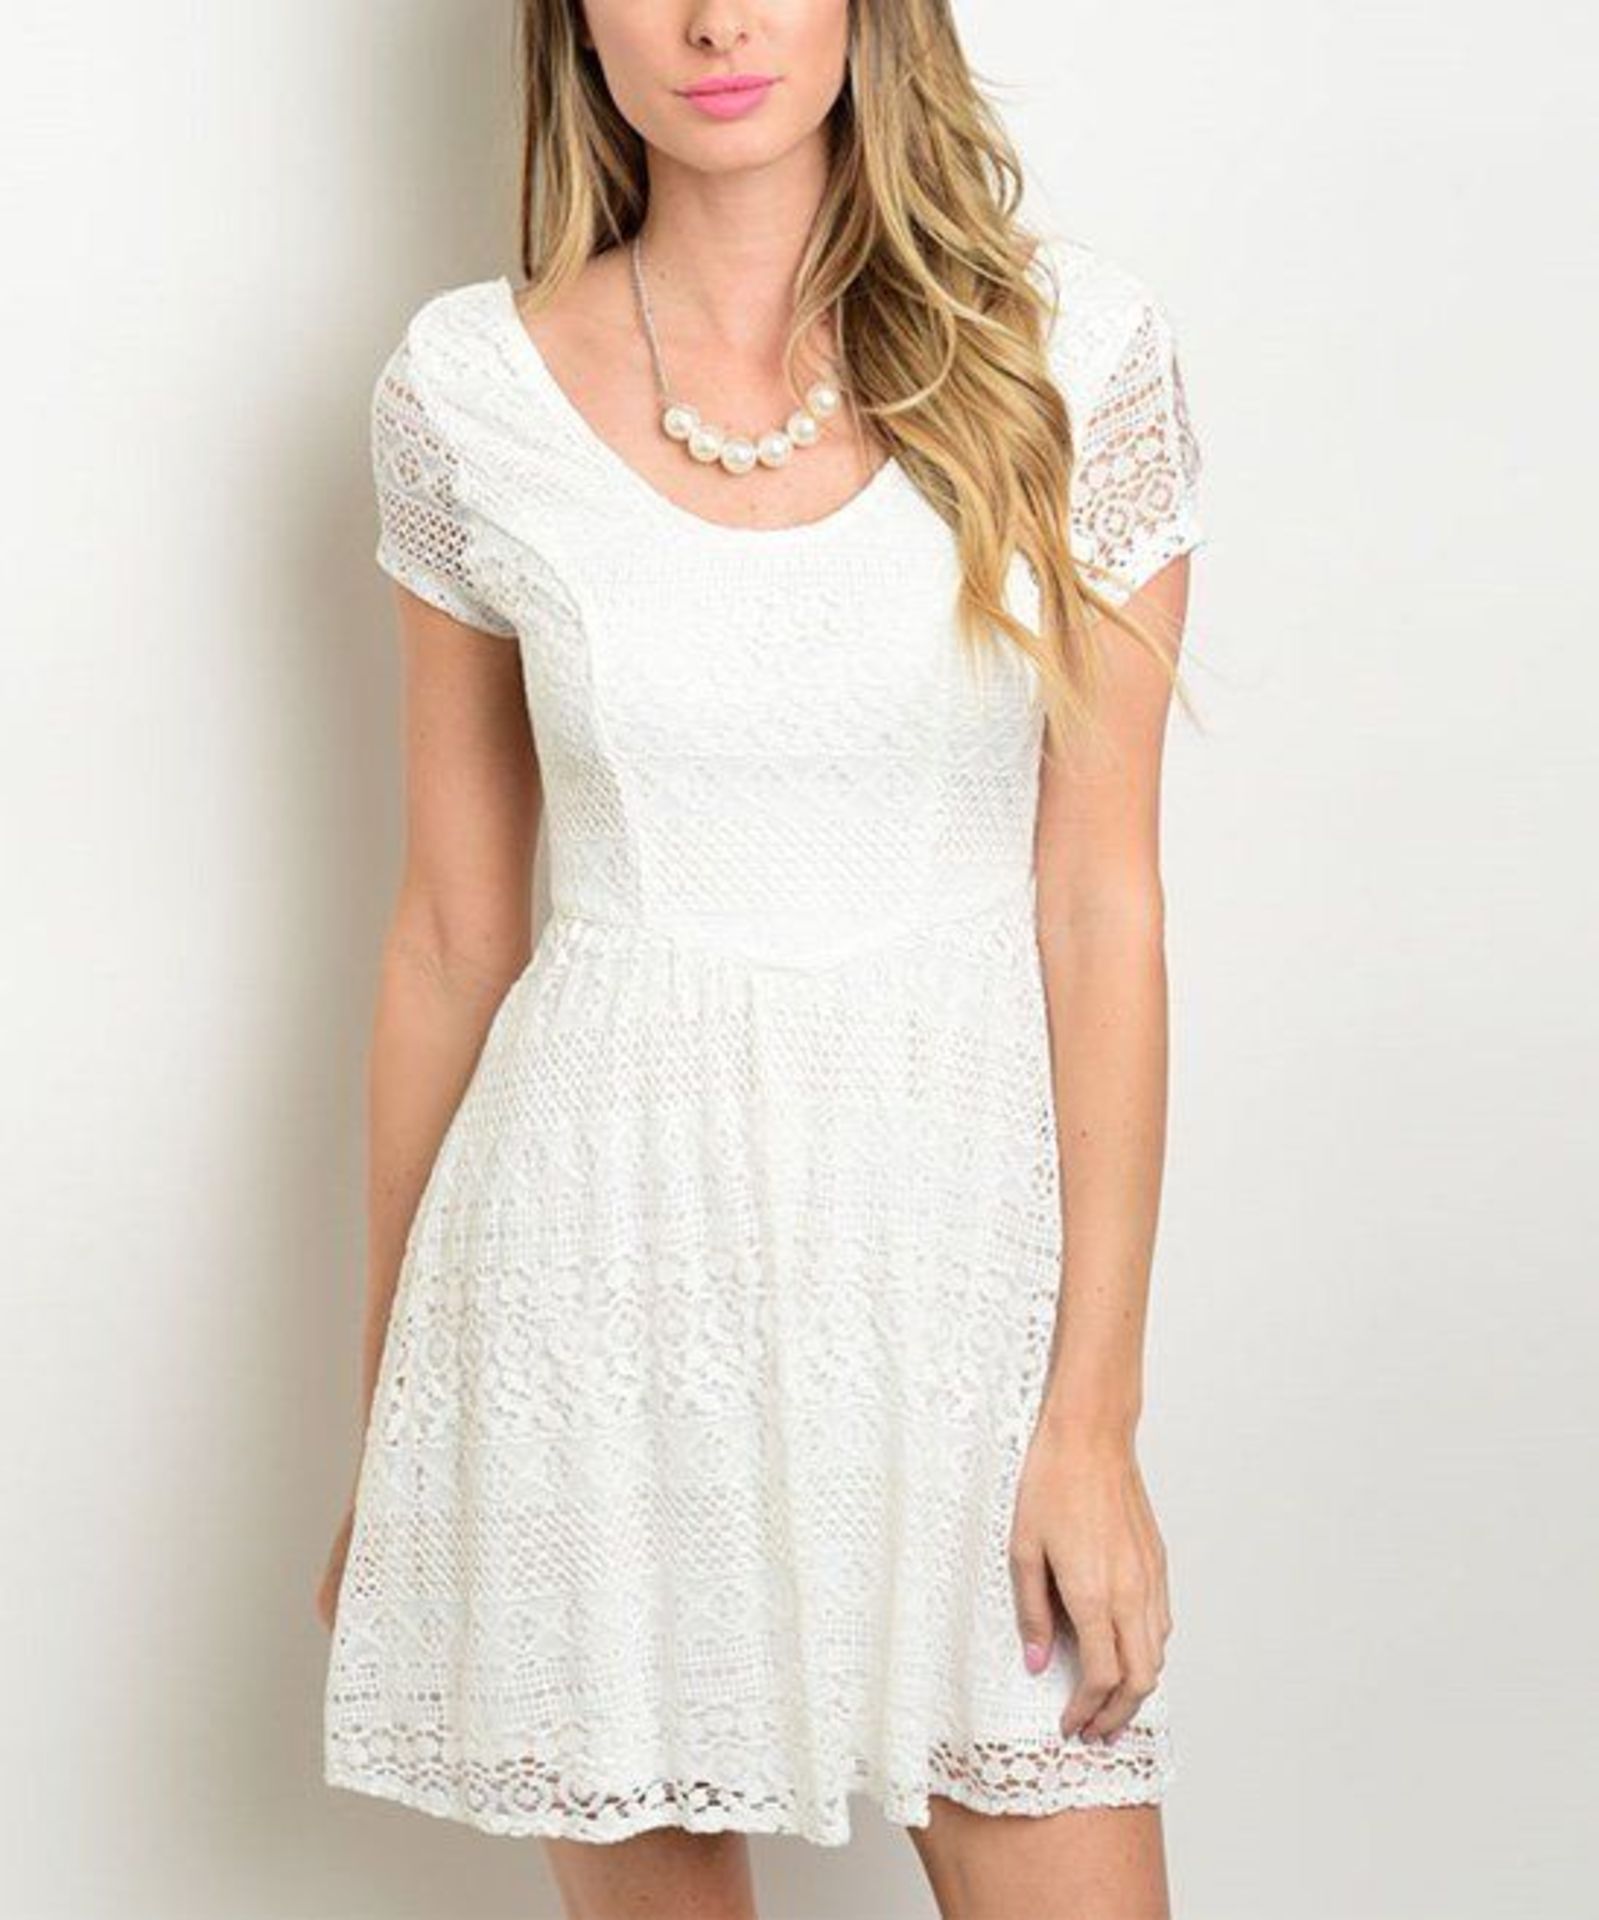 Forever Lily Off-White Crochet Cutout Dress (Size Small) (New without tags) [Ref: 39407613- T-53]